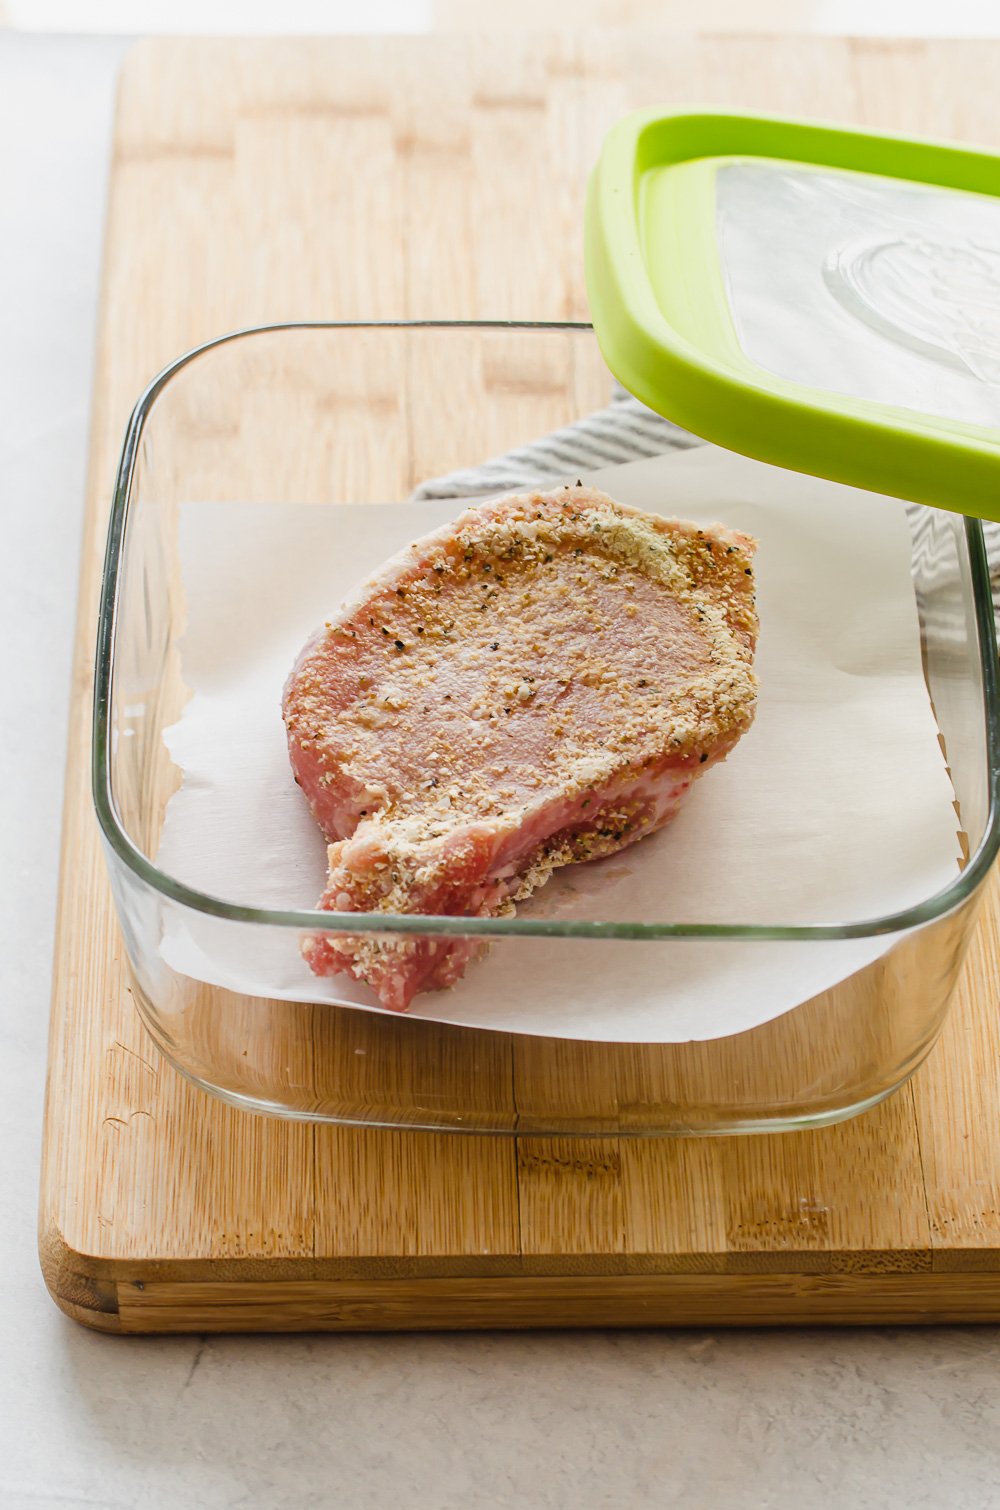 Seasoned pork chops in a freezer container.